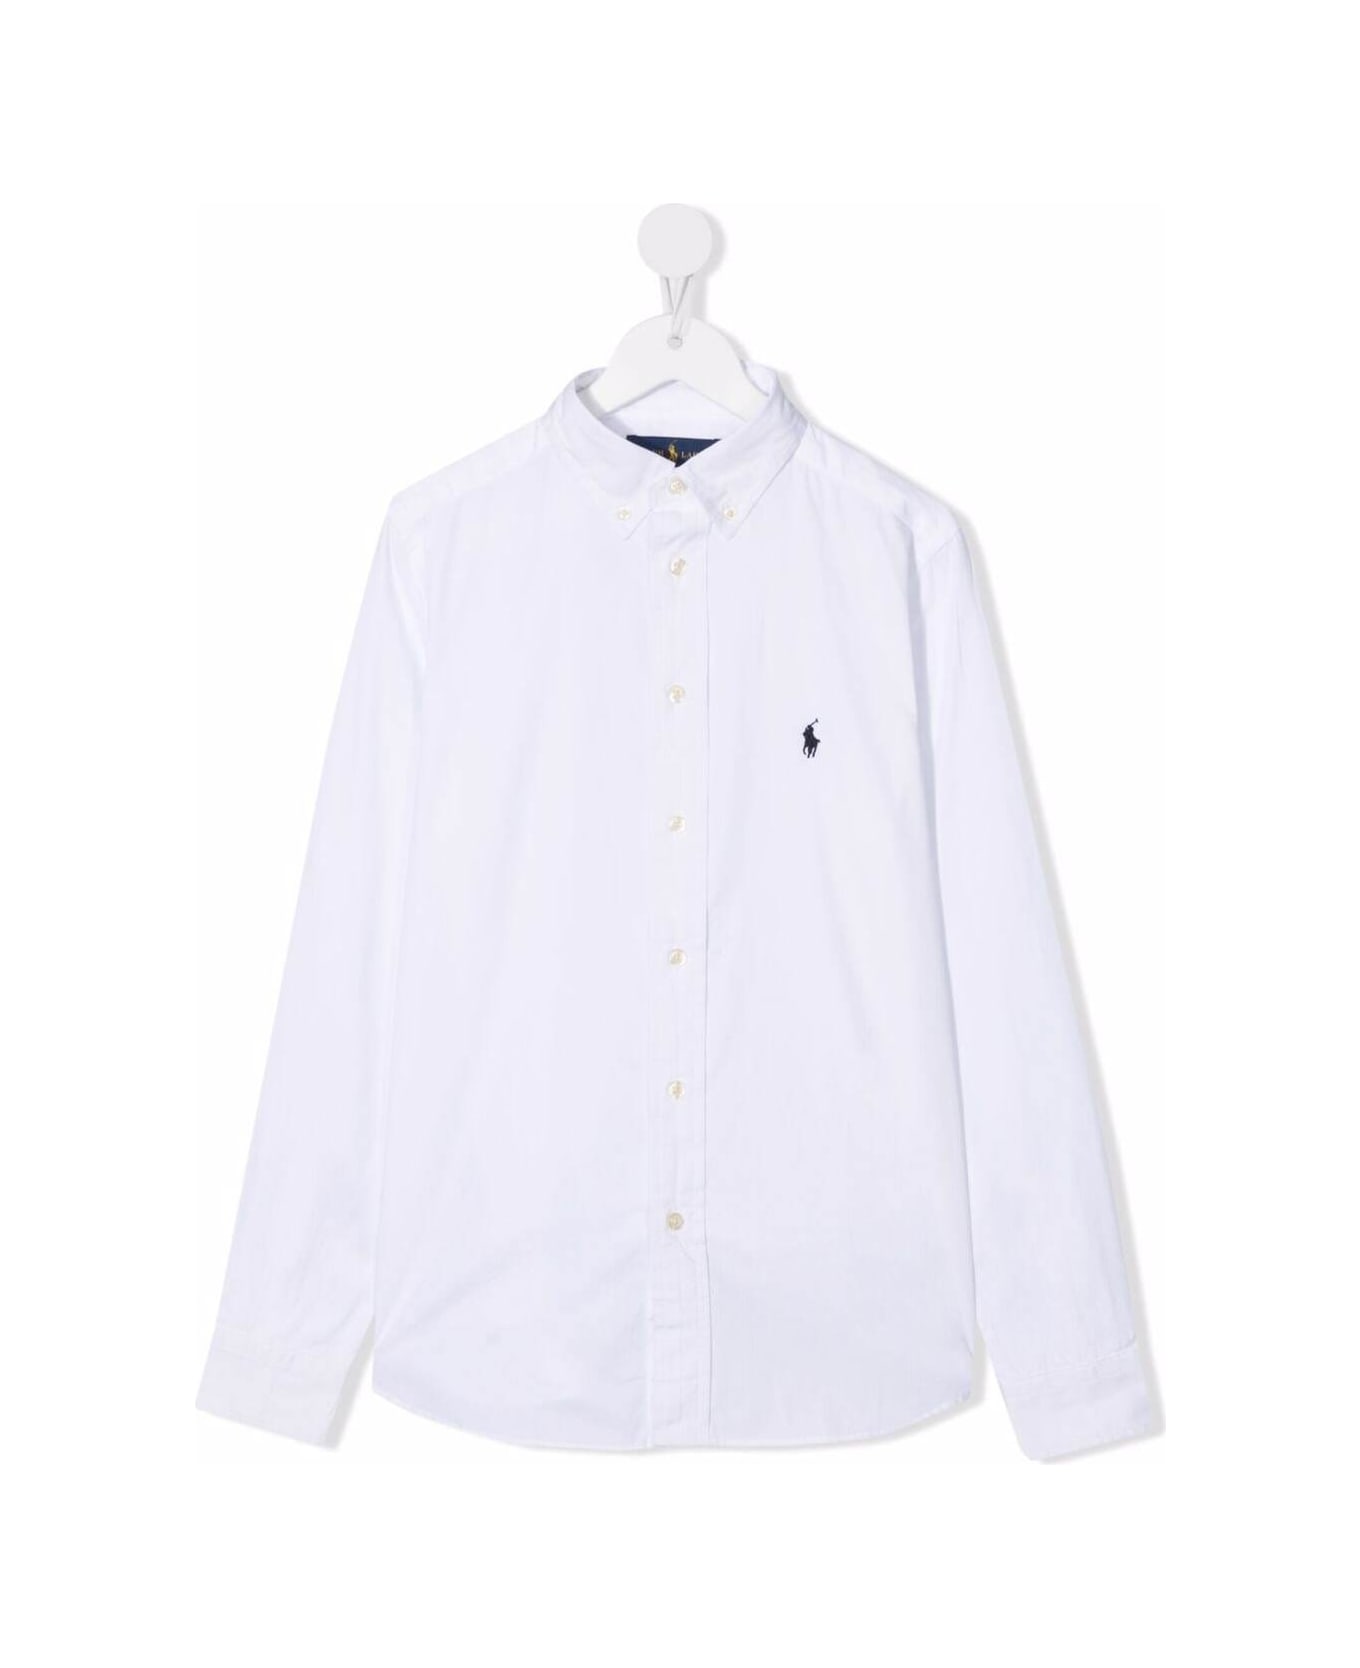 Ralph Lauren White Long Sleeve Shirt With Logo Embroidery In Cotton Boy - White シャツ